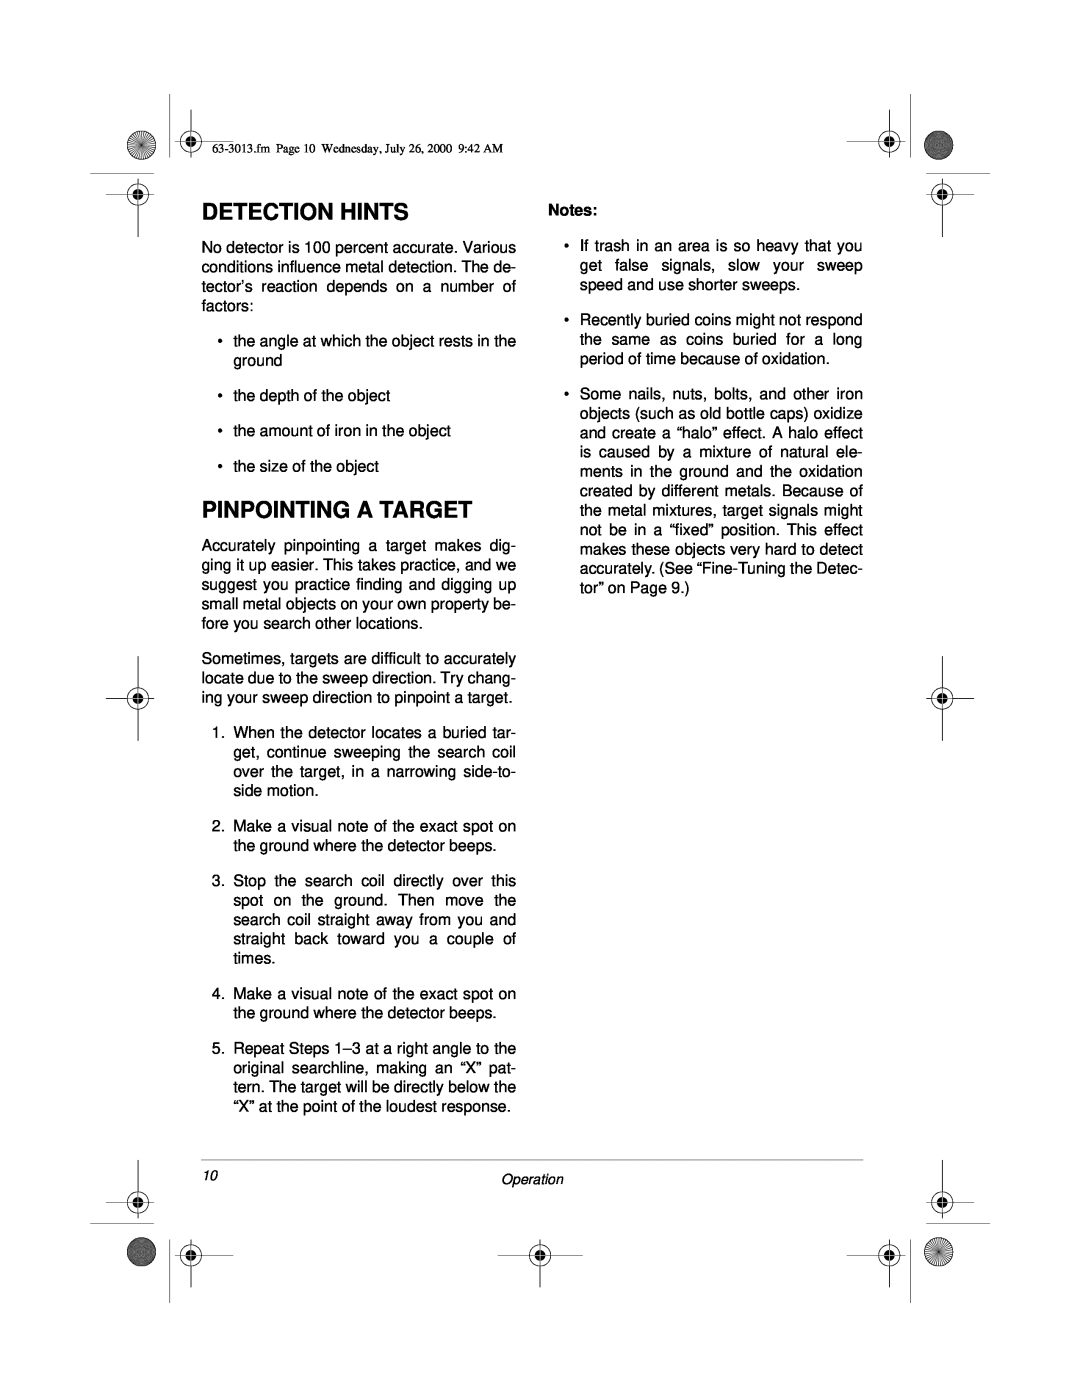 Radio Shack 63-3013 owner manual Detection Hints, Pinpointing A Target 